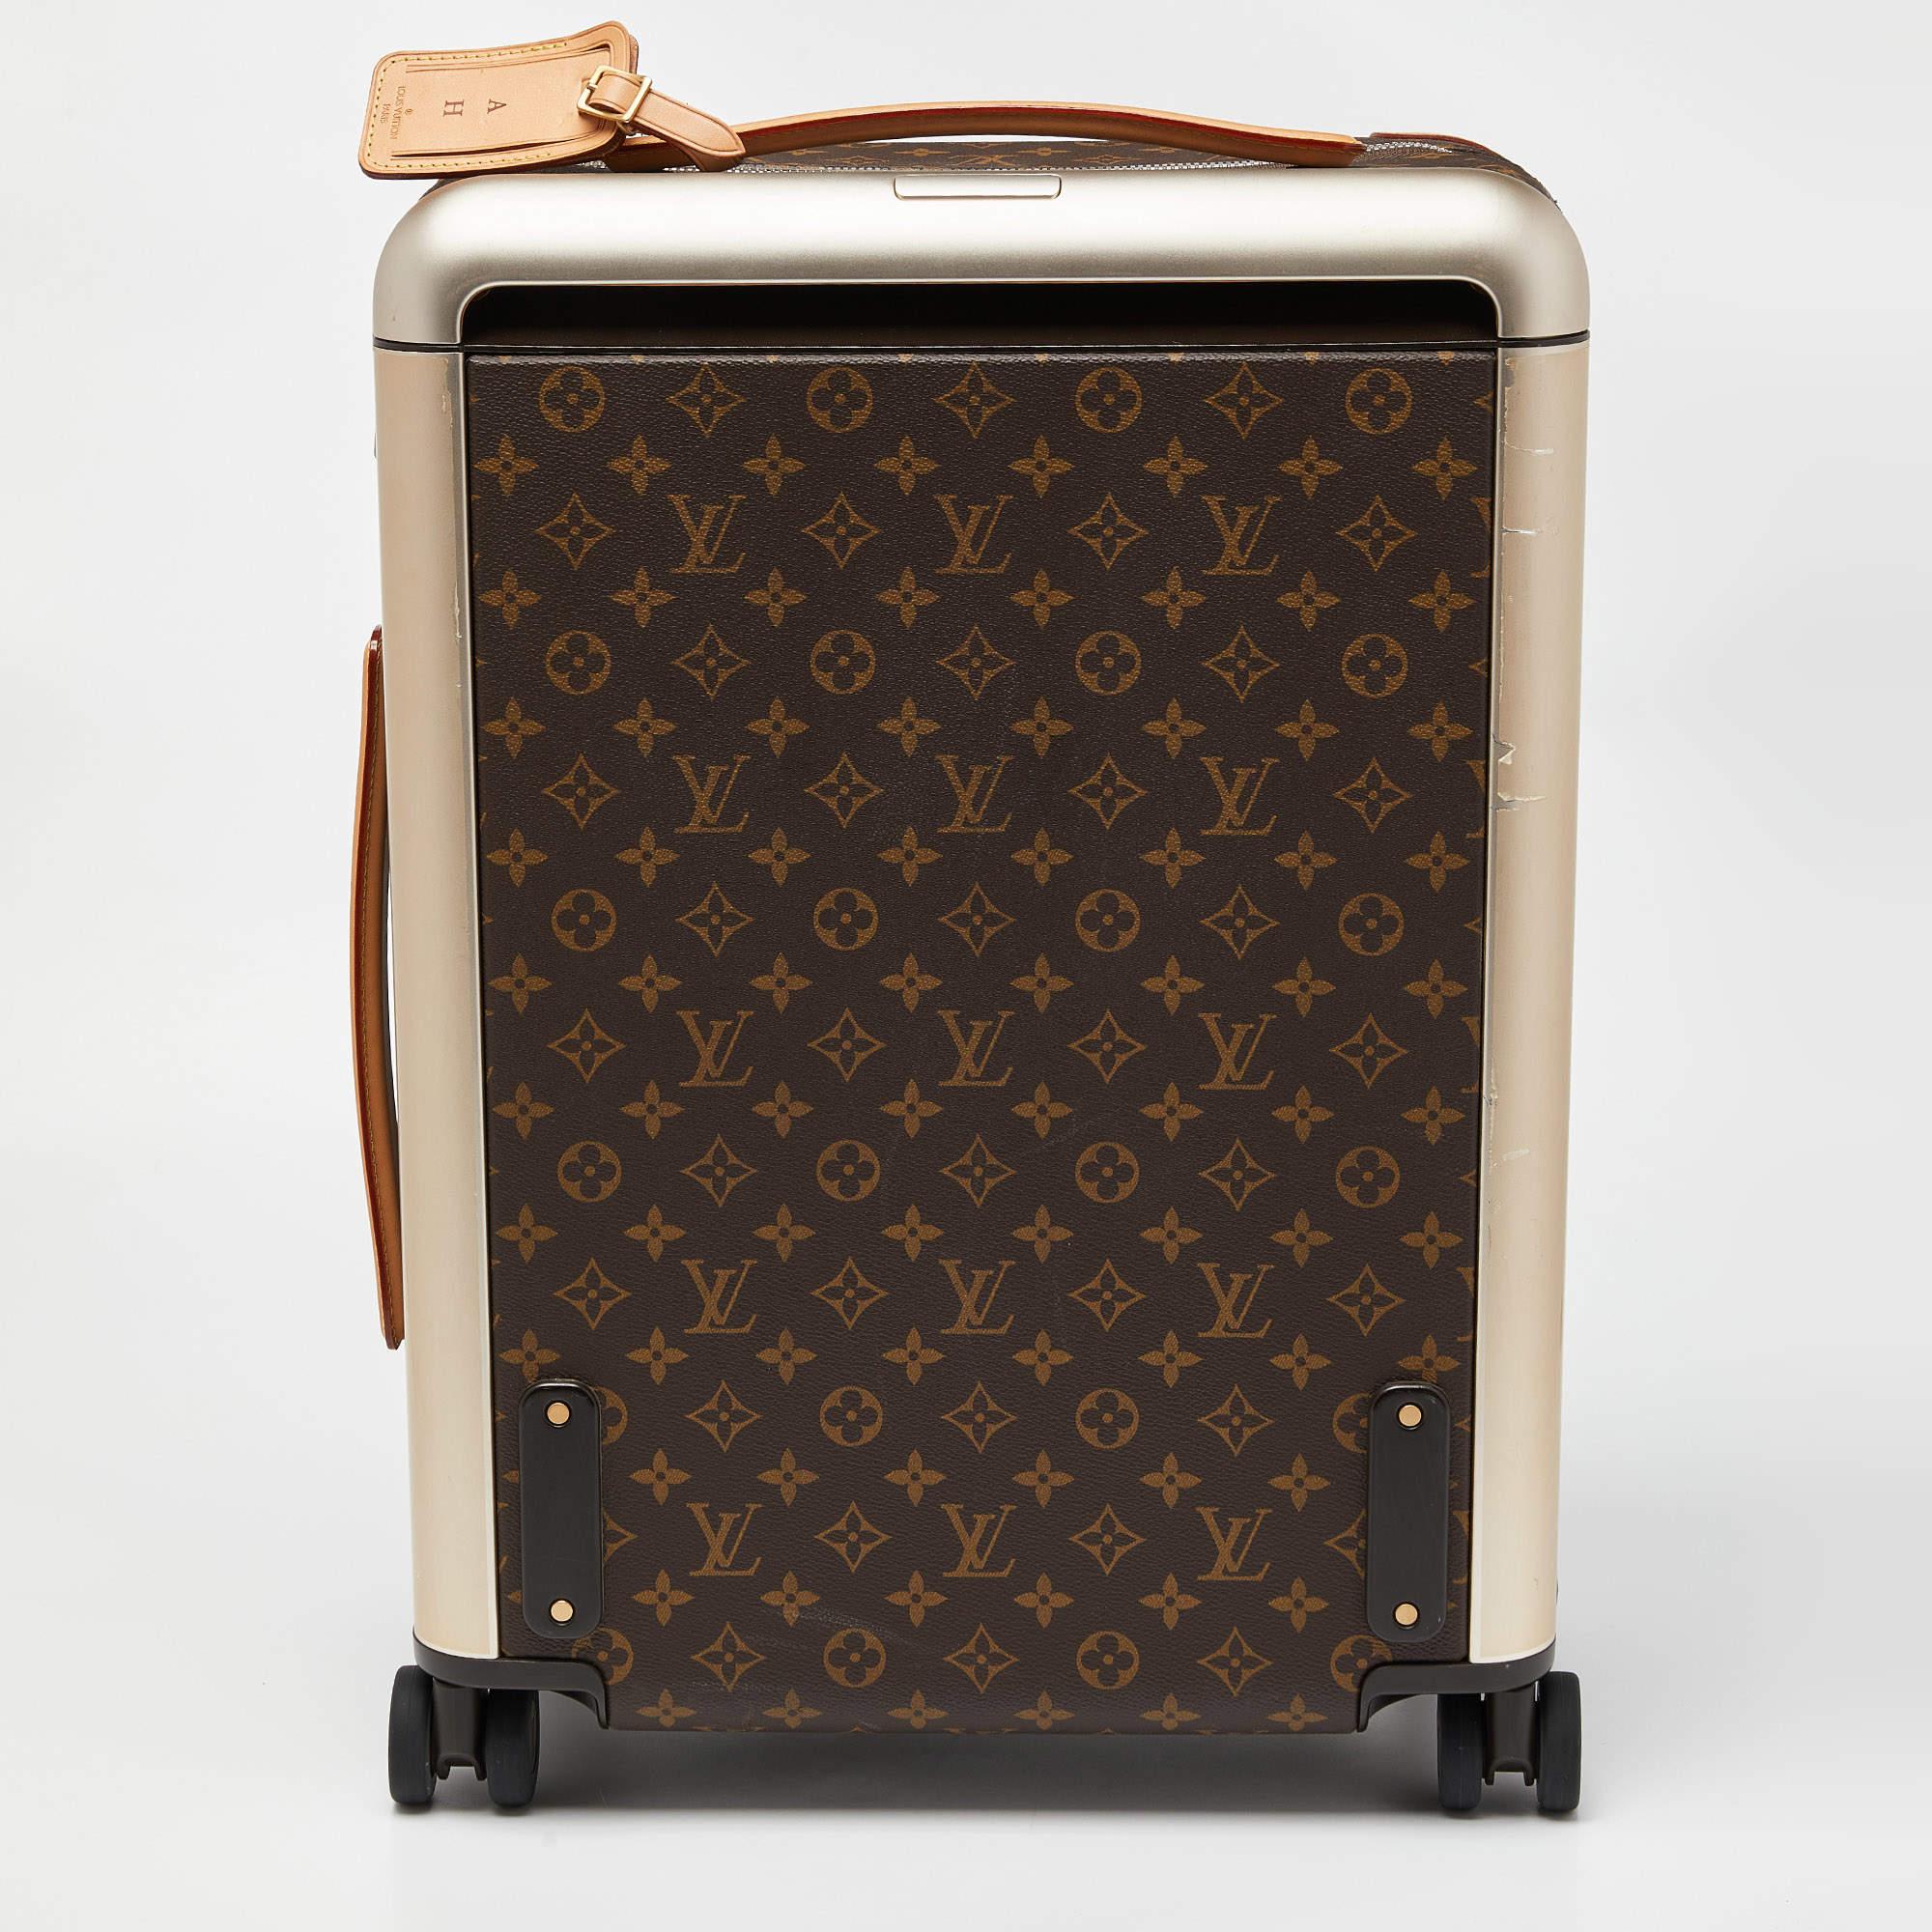 To elevate your traveling experience, Louis Vuitton brings you this reliable Horizon 50 suitcase. Crafted from Monogram canvas, this suitcase displays silver-tone fittings, a sturdy trolley handle, and a spacious lined interior. For convenience,